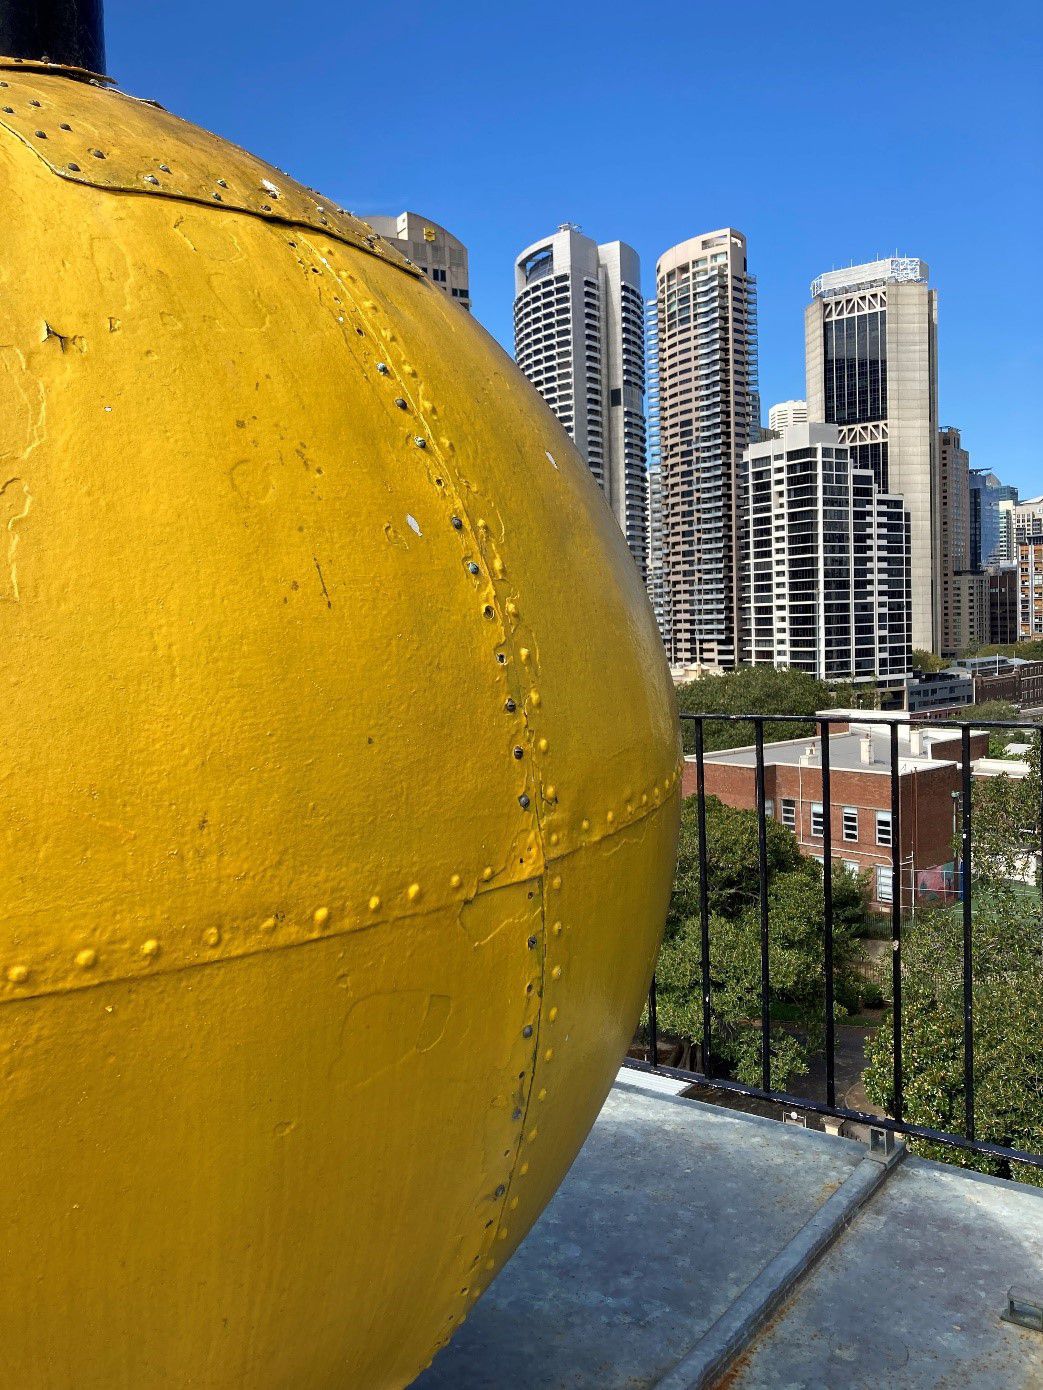 View from Sydney Observatory time ball tower. Nancy Cushing, March 2021.